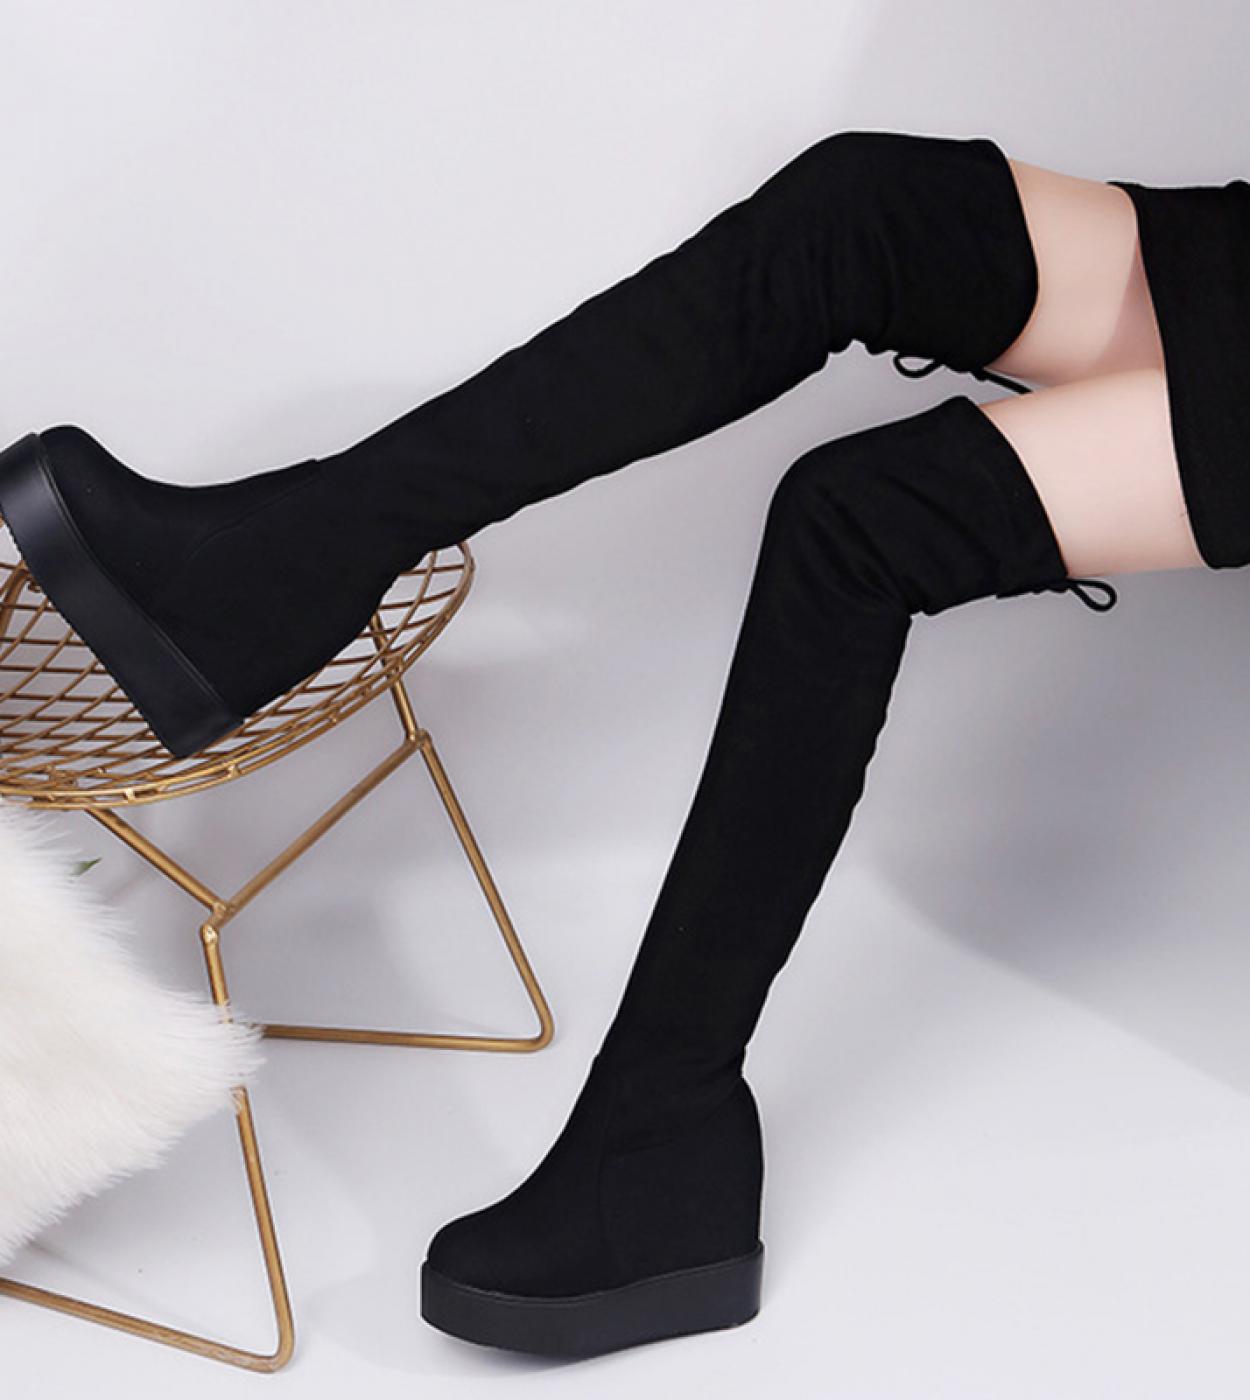 Comemore 2022 Fashion Hidden Heel Woman Long Over The Knee Boot Womens Winter Platform High Socks Boots For Women Shoes